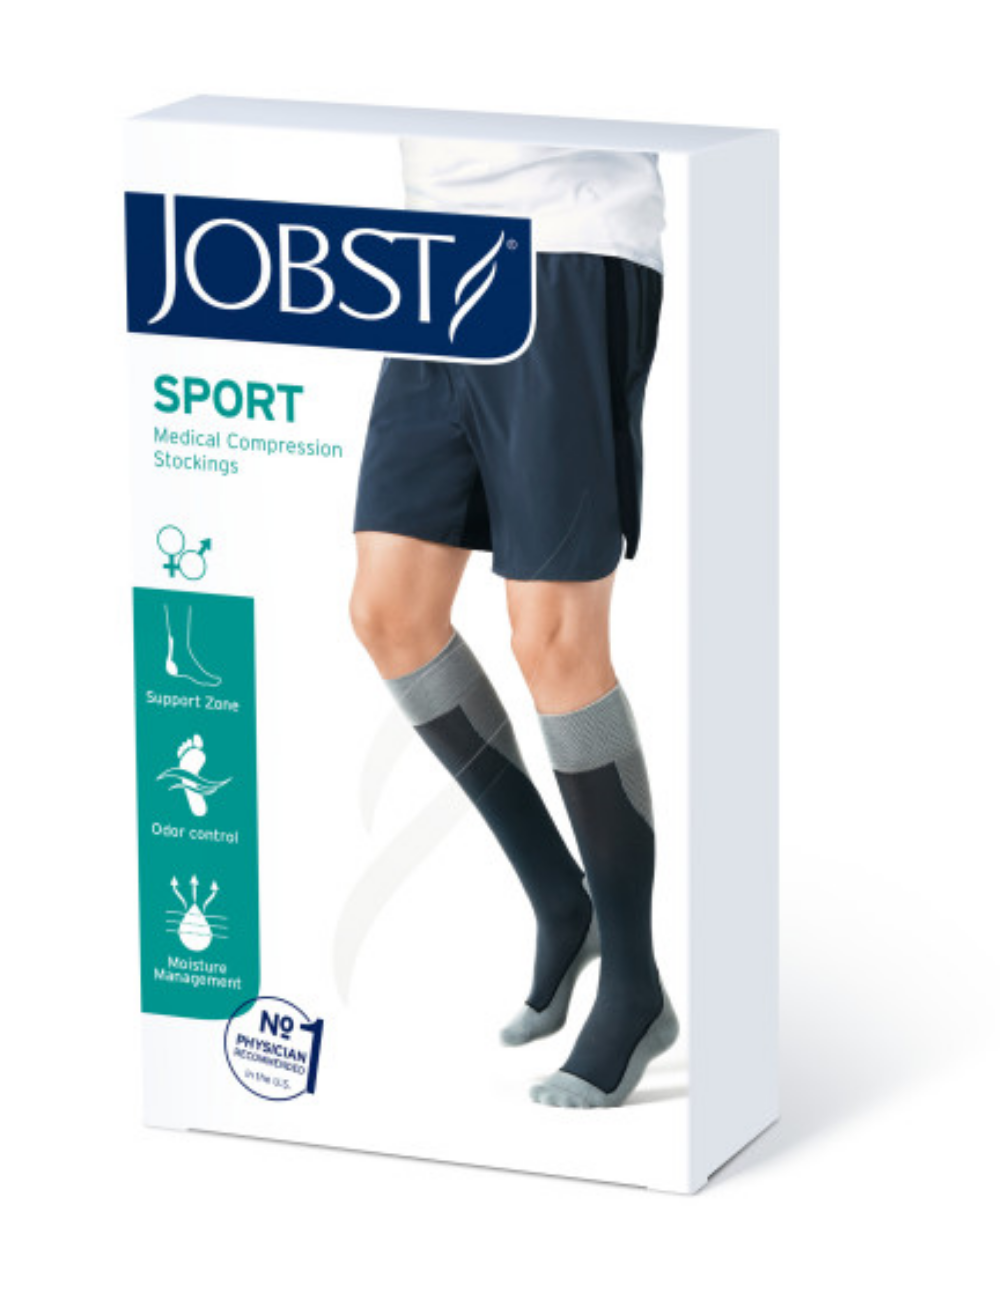 Zipper Compression Socks, 2 Pairs 15-20 mmHg Closed Toe Compression  Stockings for Men Women，Suit for Running,Nurse,Travel,Cycling,Athletic